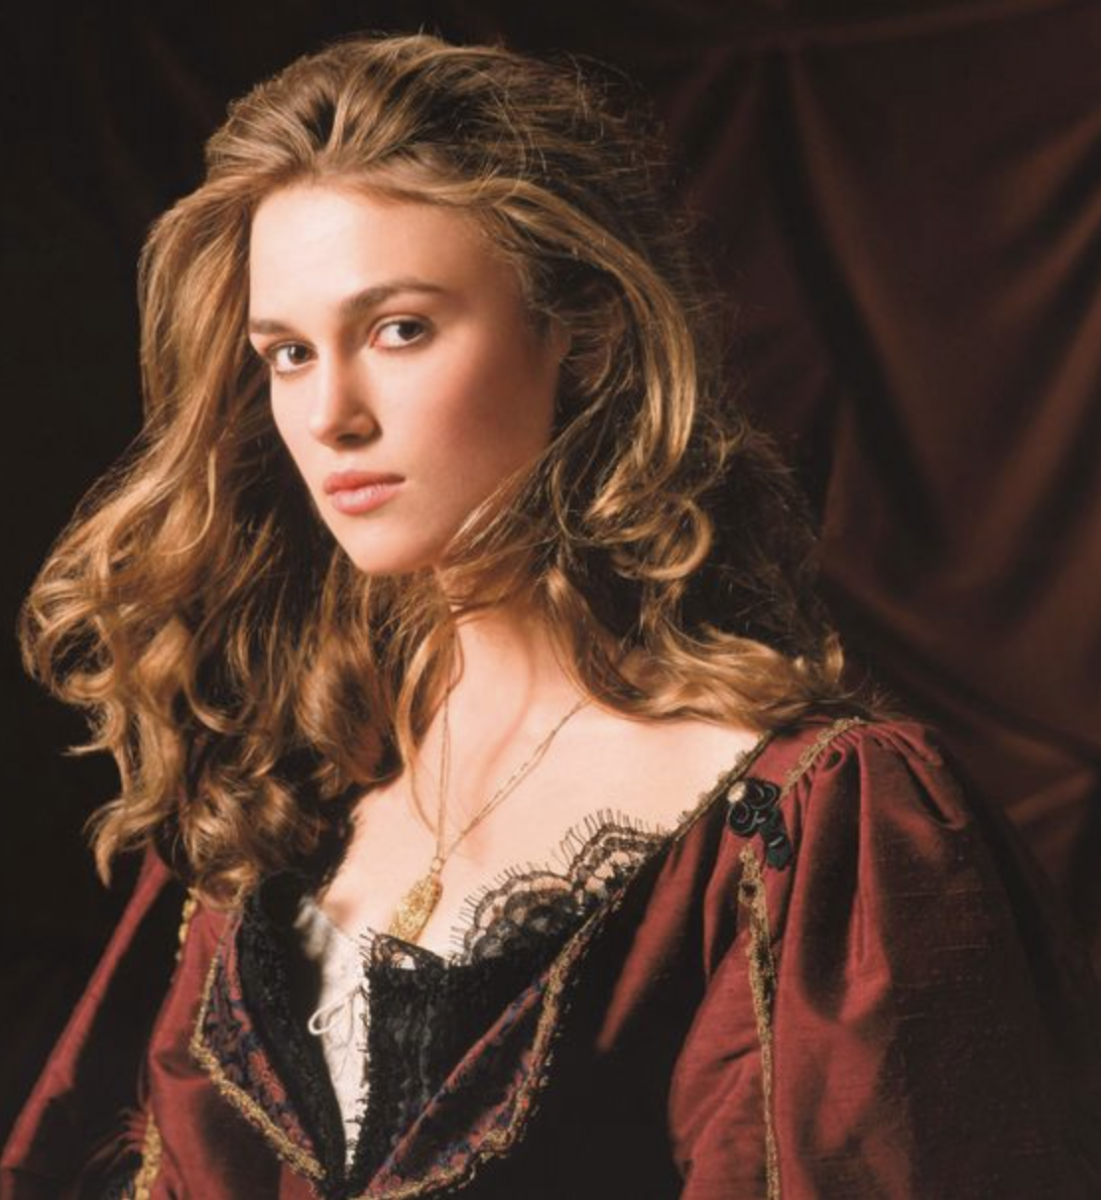 Keira Knightley as Elizabeth Swann from The Pirates of the Caribbean